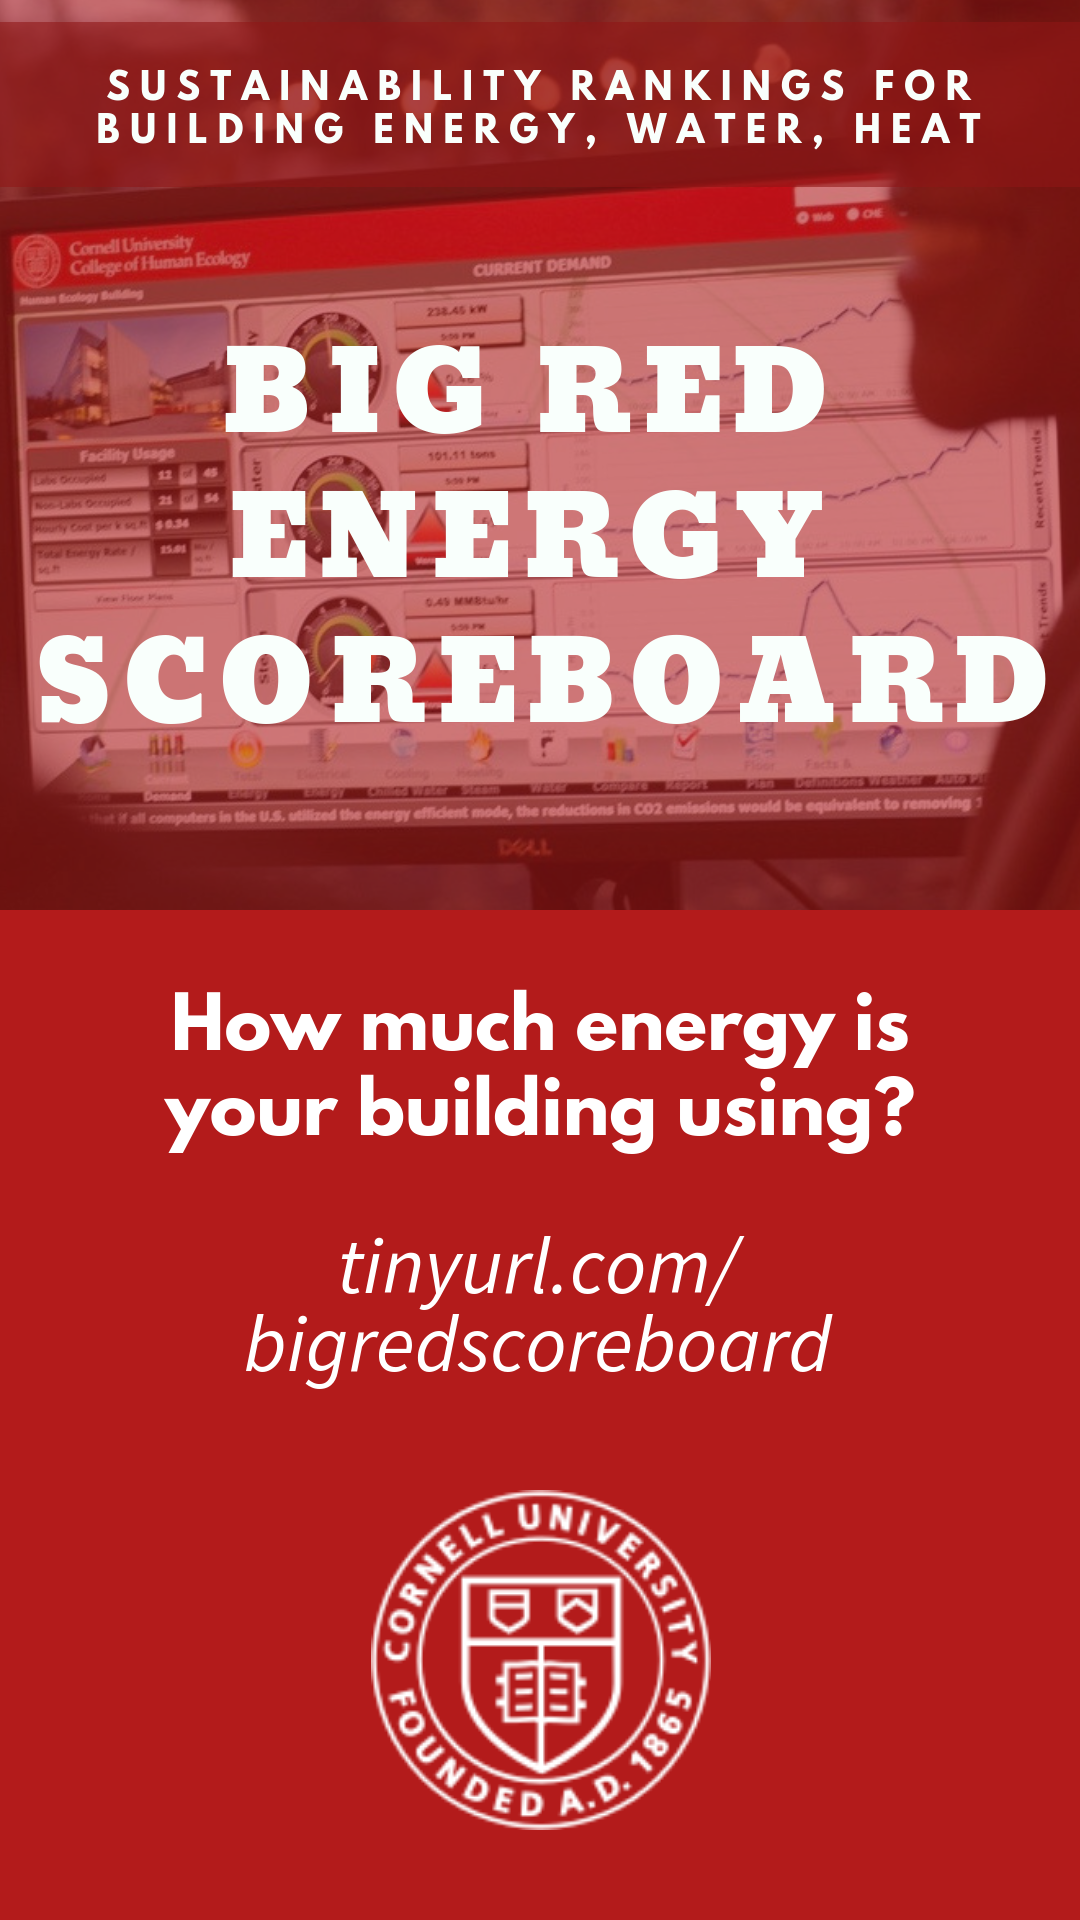 Text "Big Red Energy Dashboard" over energy graph